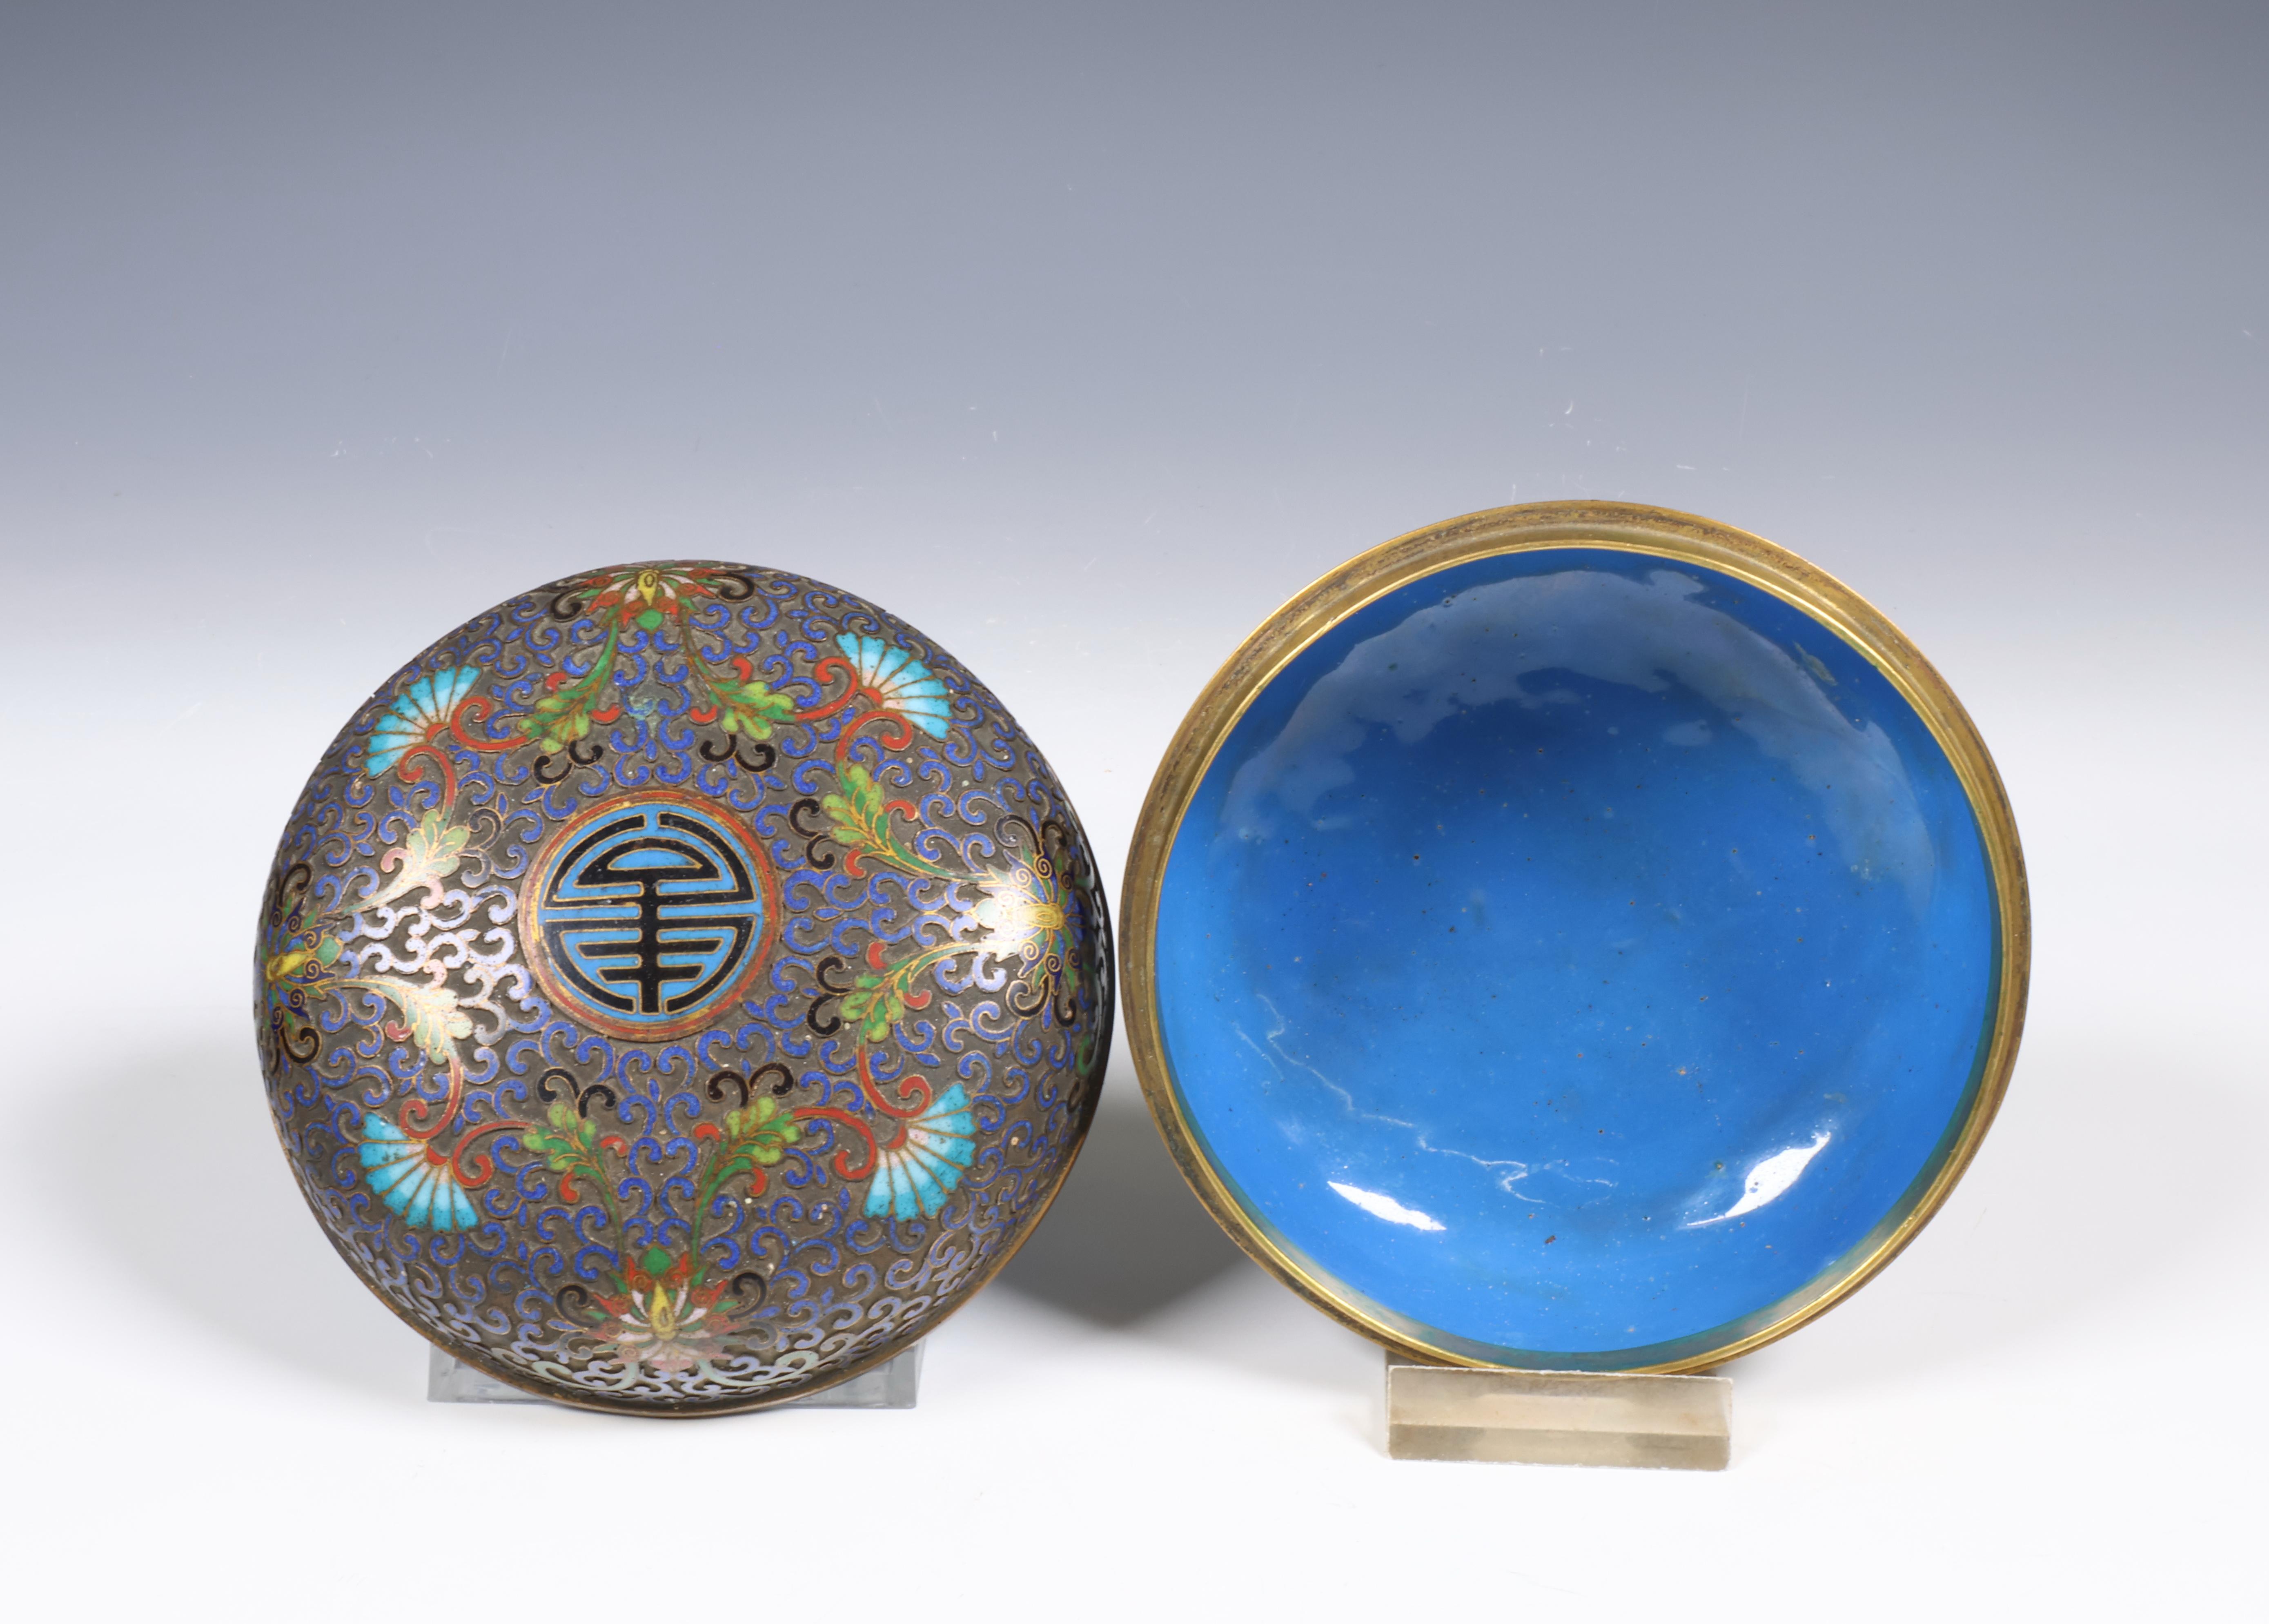 China, cloisonné enamel incense box and cover, late Qing dynasty (1644-1912), - Image 2 of 3